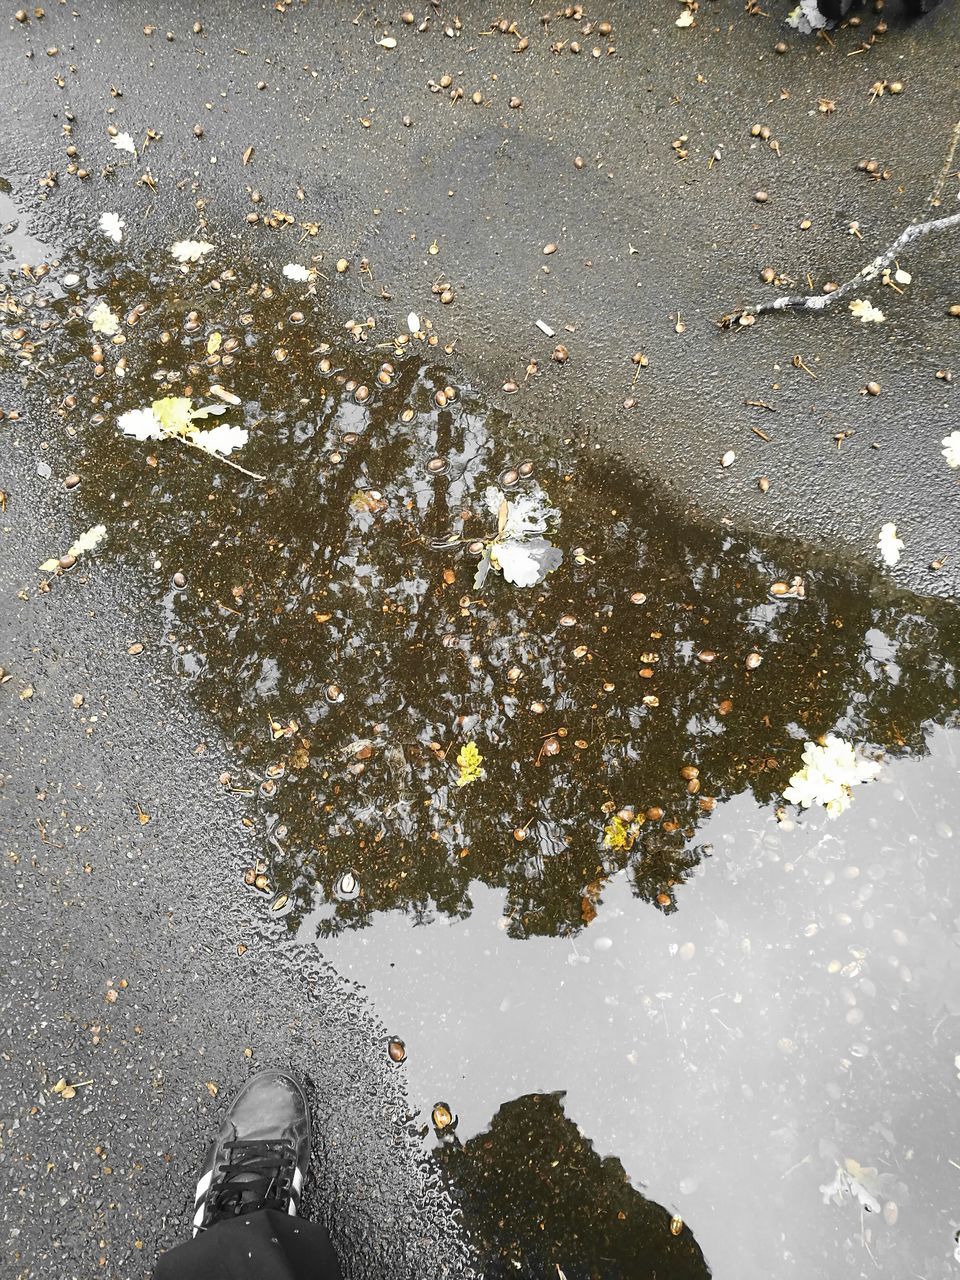 LOW SECTION VIEW OF PERSON STANDING BY PUDDLE ON ROAD